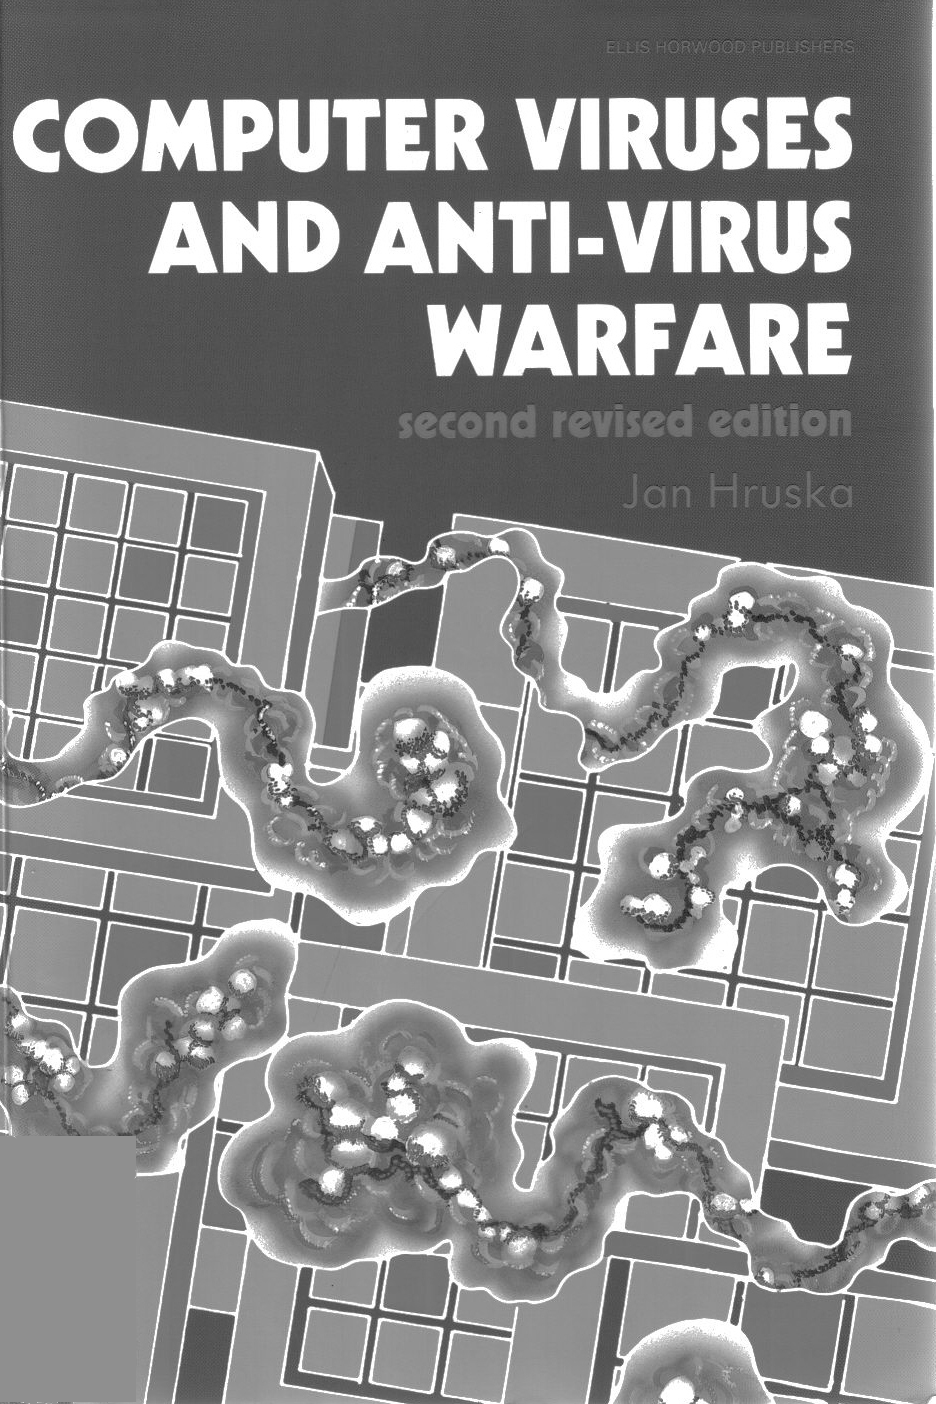 ﻿COMPUTER VIRUSES AND ANTI-VIRUS WARFARE, Second Revised Edition, ISBN 0-13-036377-4 (book cover)